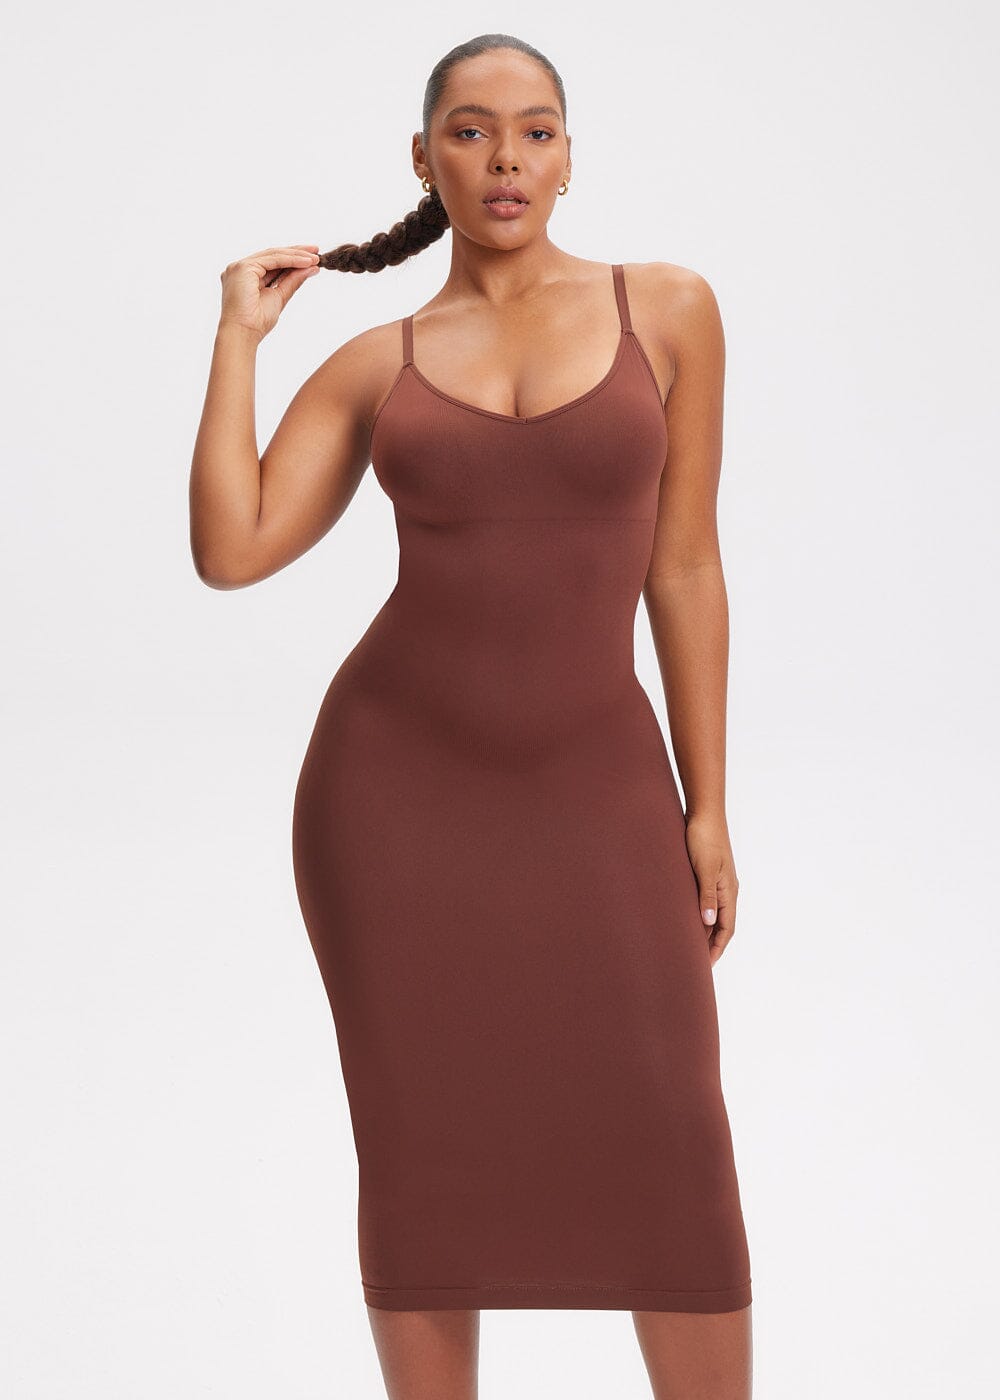 Another shes waisted haul dress try on !! #shapeweardress #tryonhaulti, Dresses